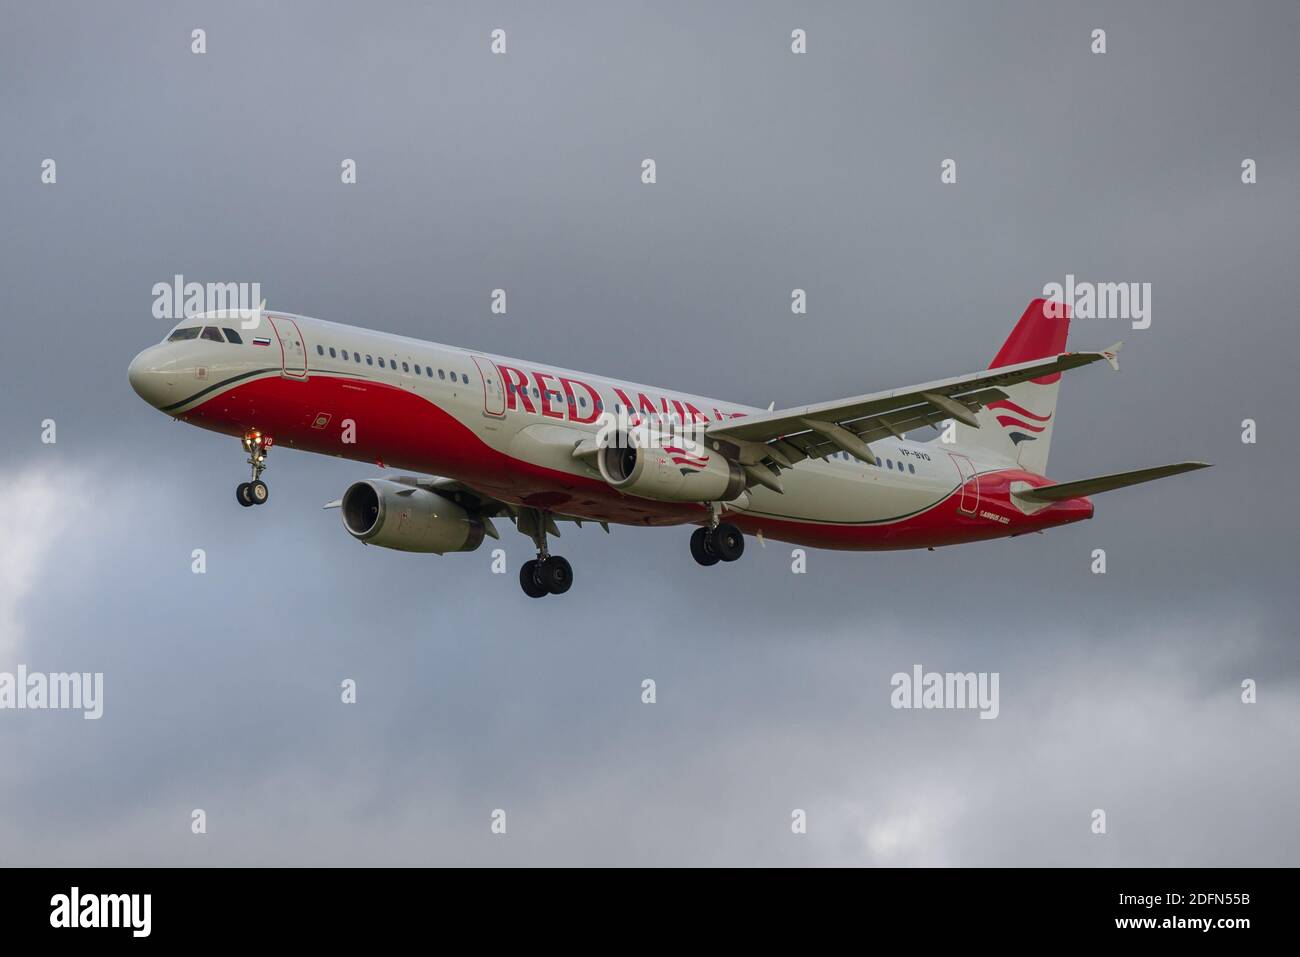 SAINT PETERSBURG, RUSSIA - OCTOBER 28, 2020: Airbus A321-200 (VP-BVO) Red Wings airline close-up against a dark sky Stock Photo